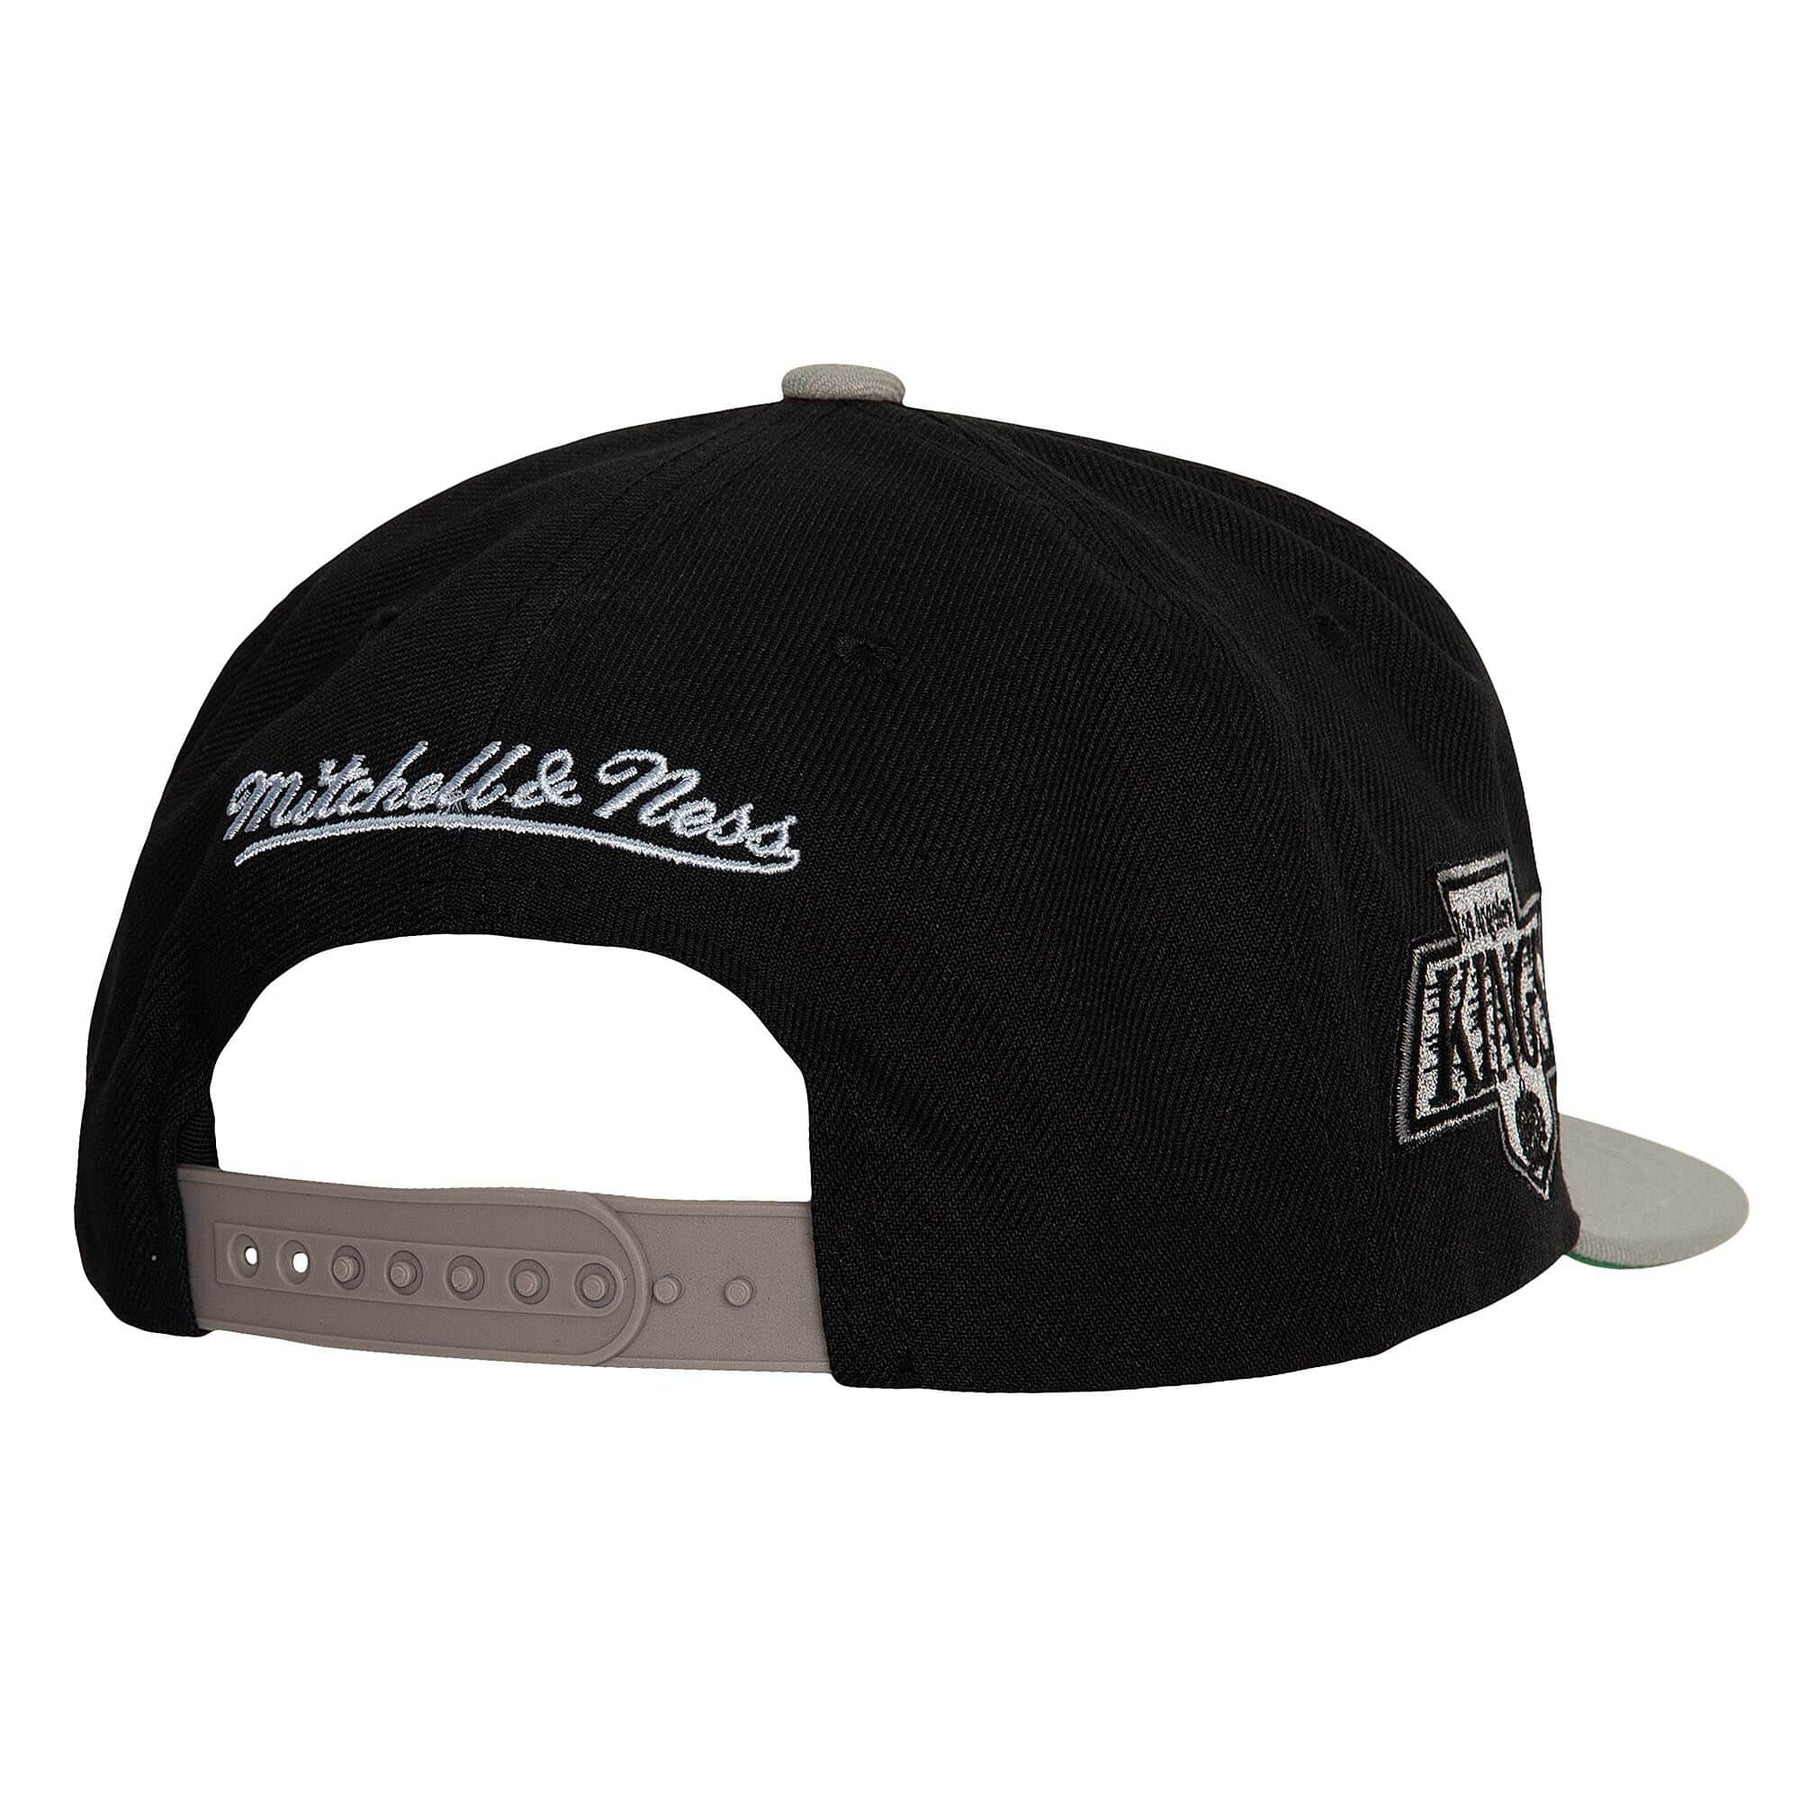 Los Angeles Kings Classic Script Snapback - Supporters Place